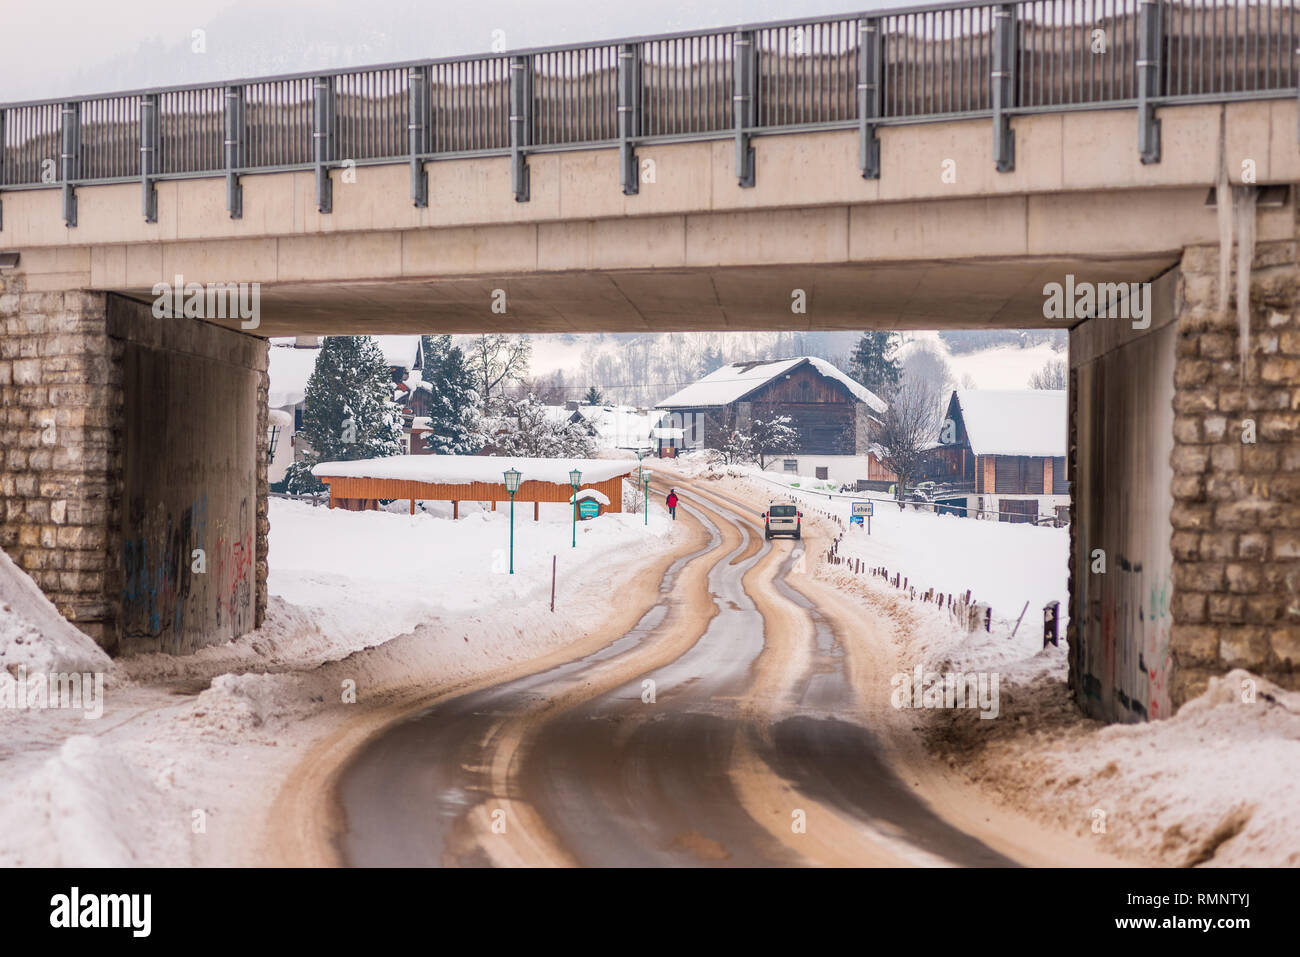 A winding road covered with snow, under the bridge. Dangerous drifts and ruts snow. Sunny day and snow all around. Styria, Austria, Europe Stock Photo